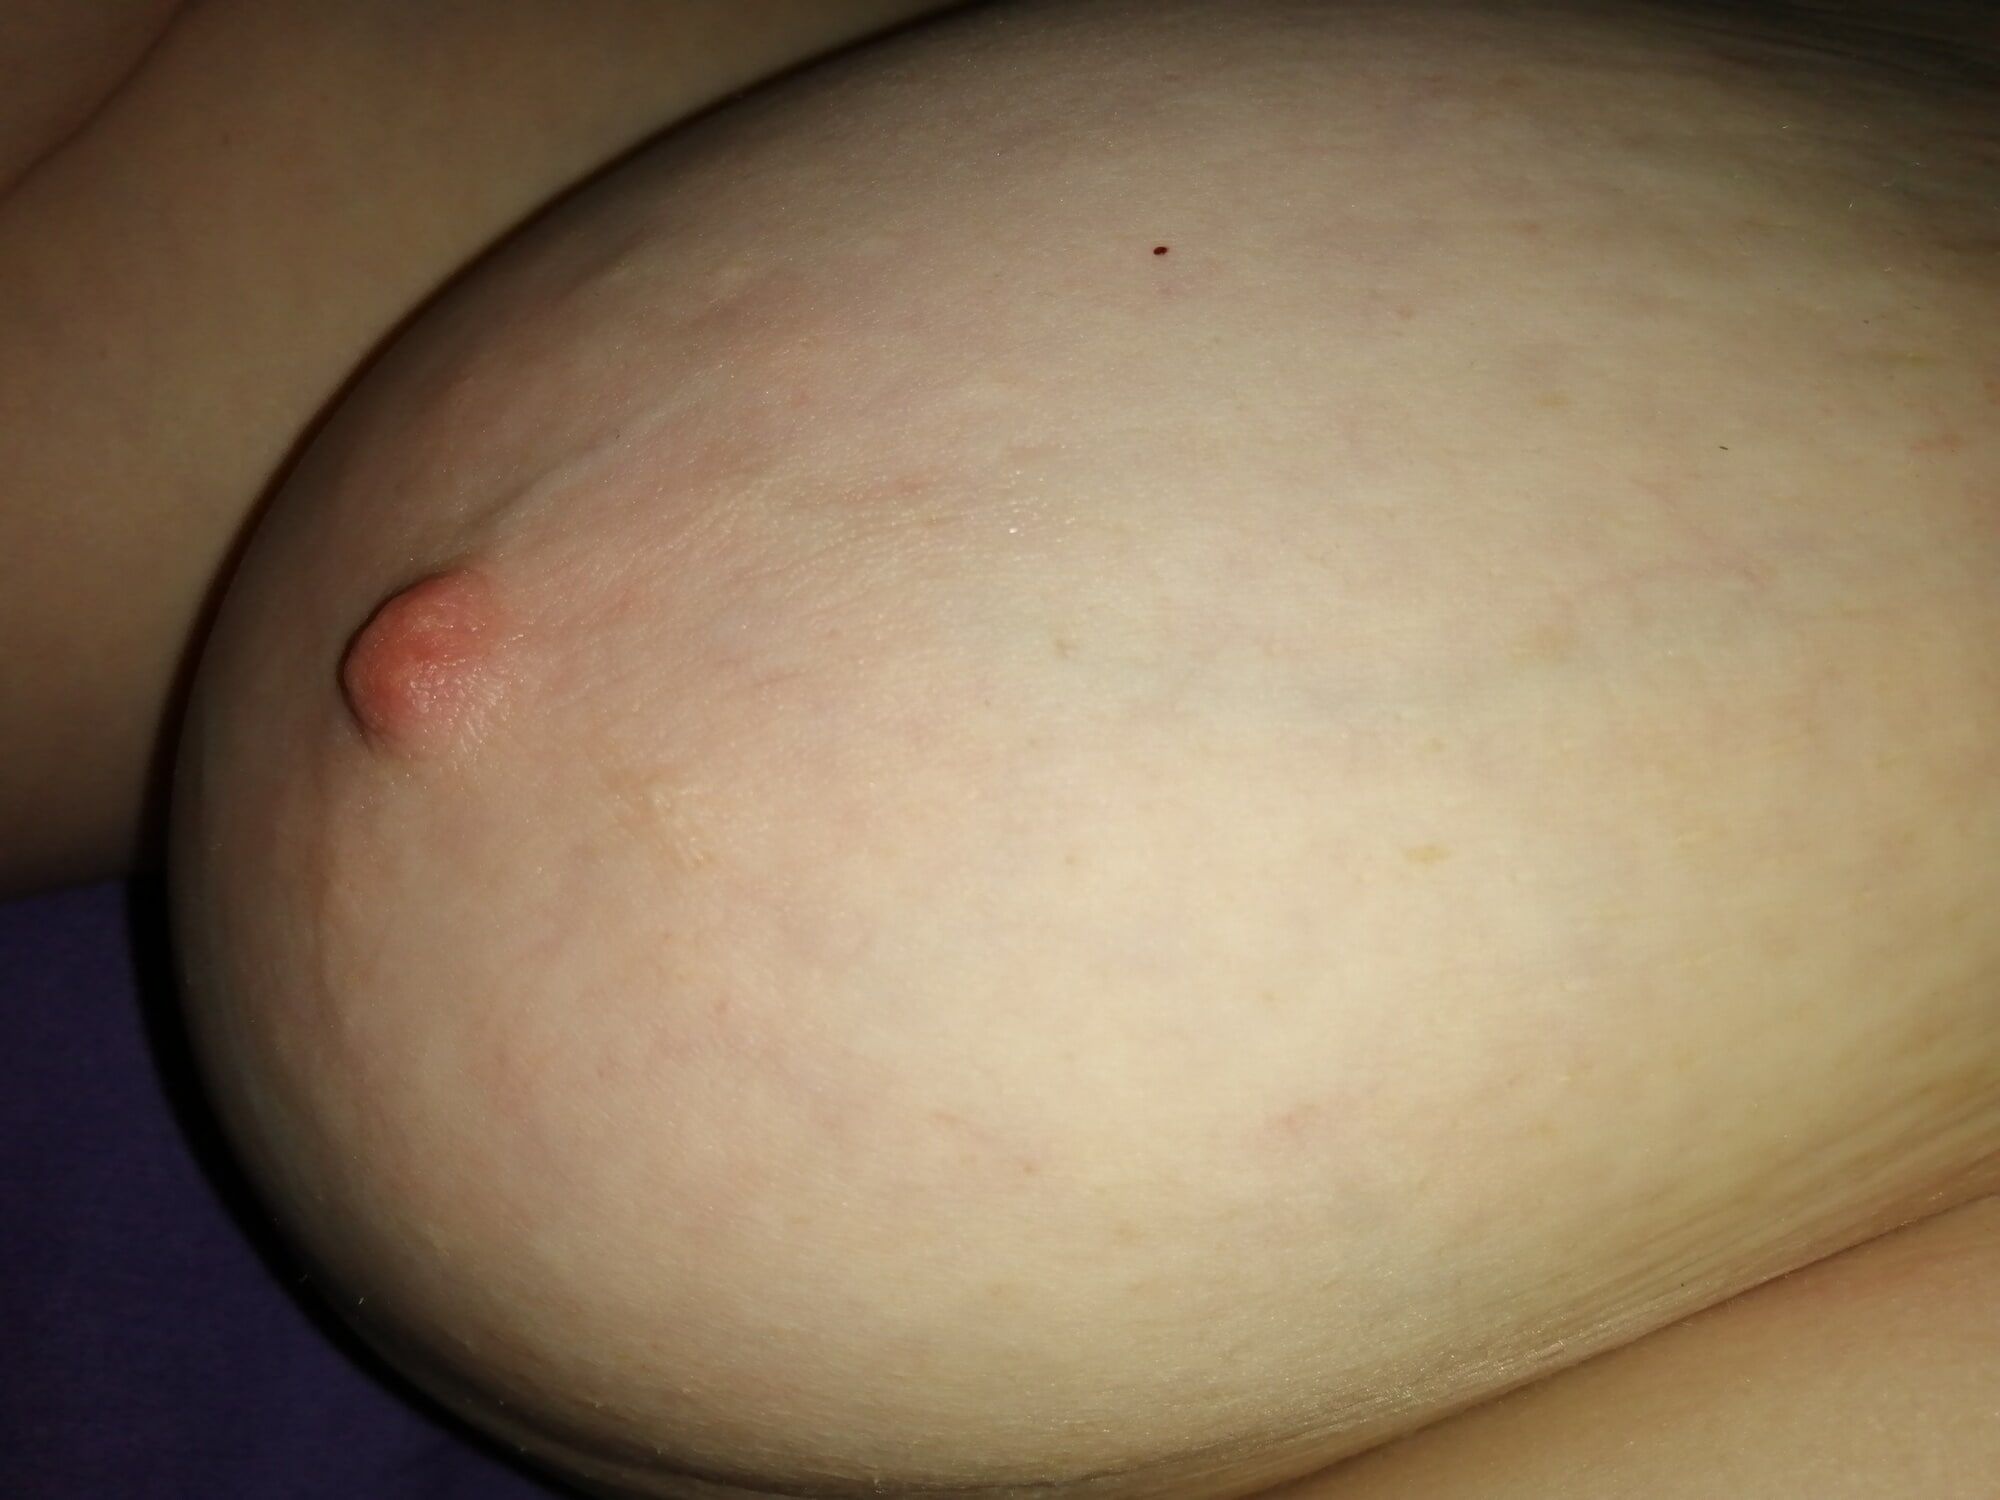 My nipples (photos taken from a lying position) #5